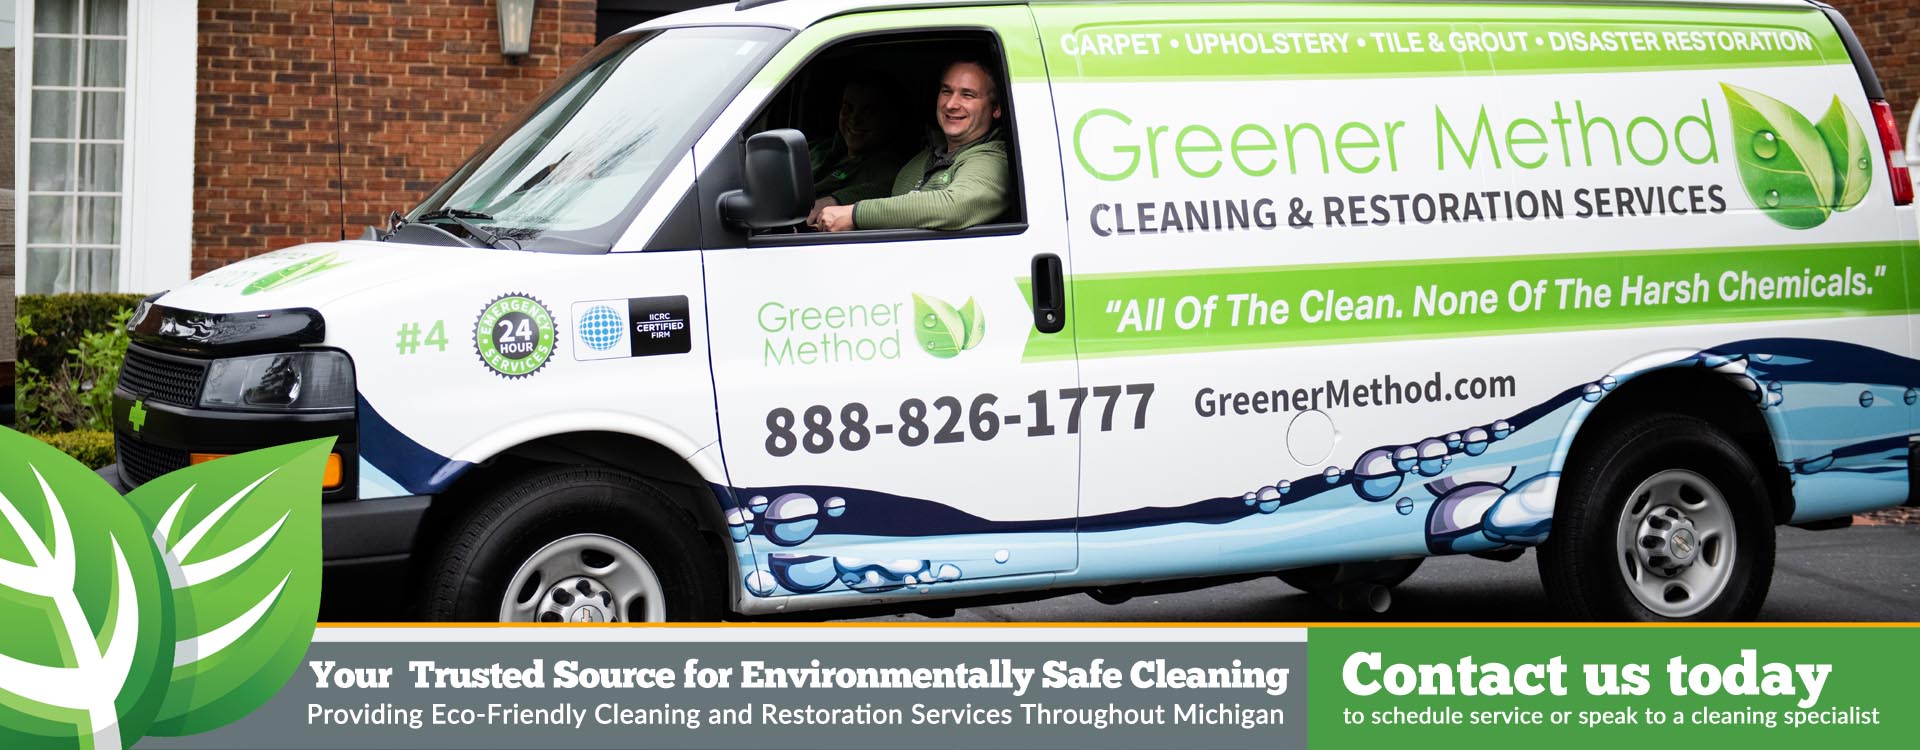 Stock Up on Your Green Cleaning Supplies - Michigan Maintenance